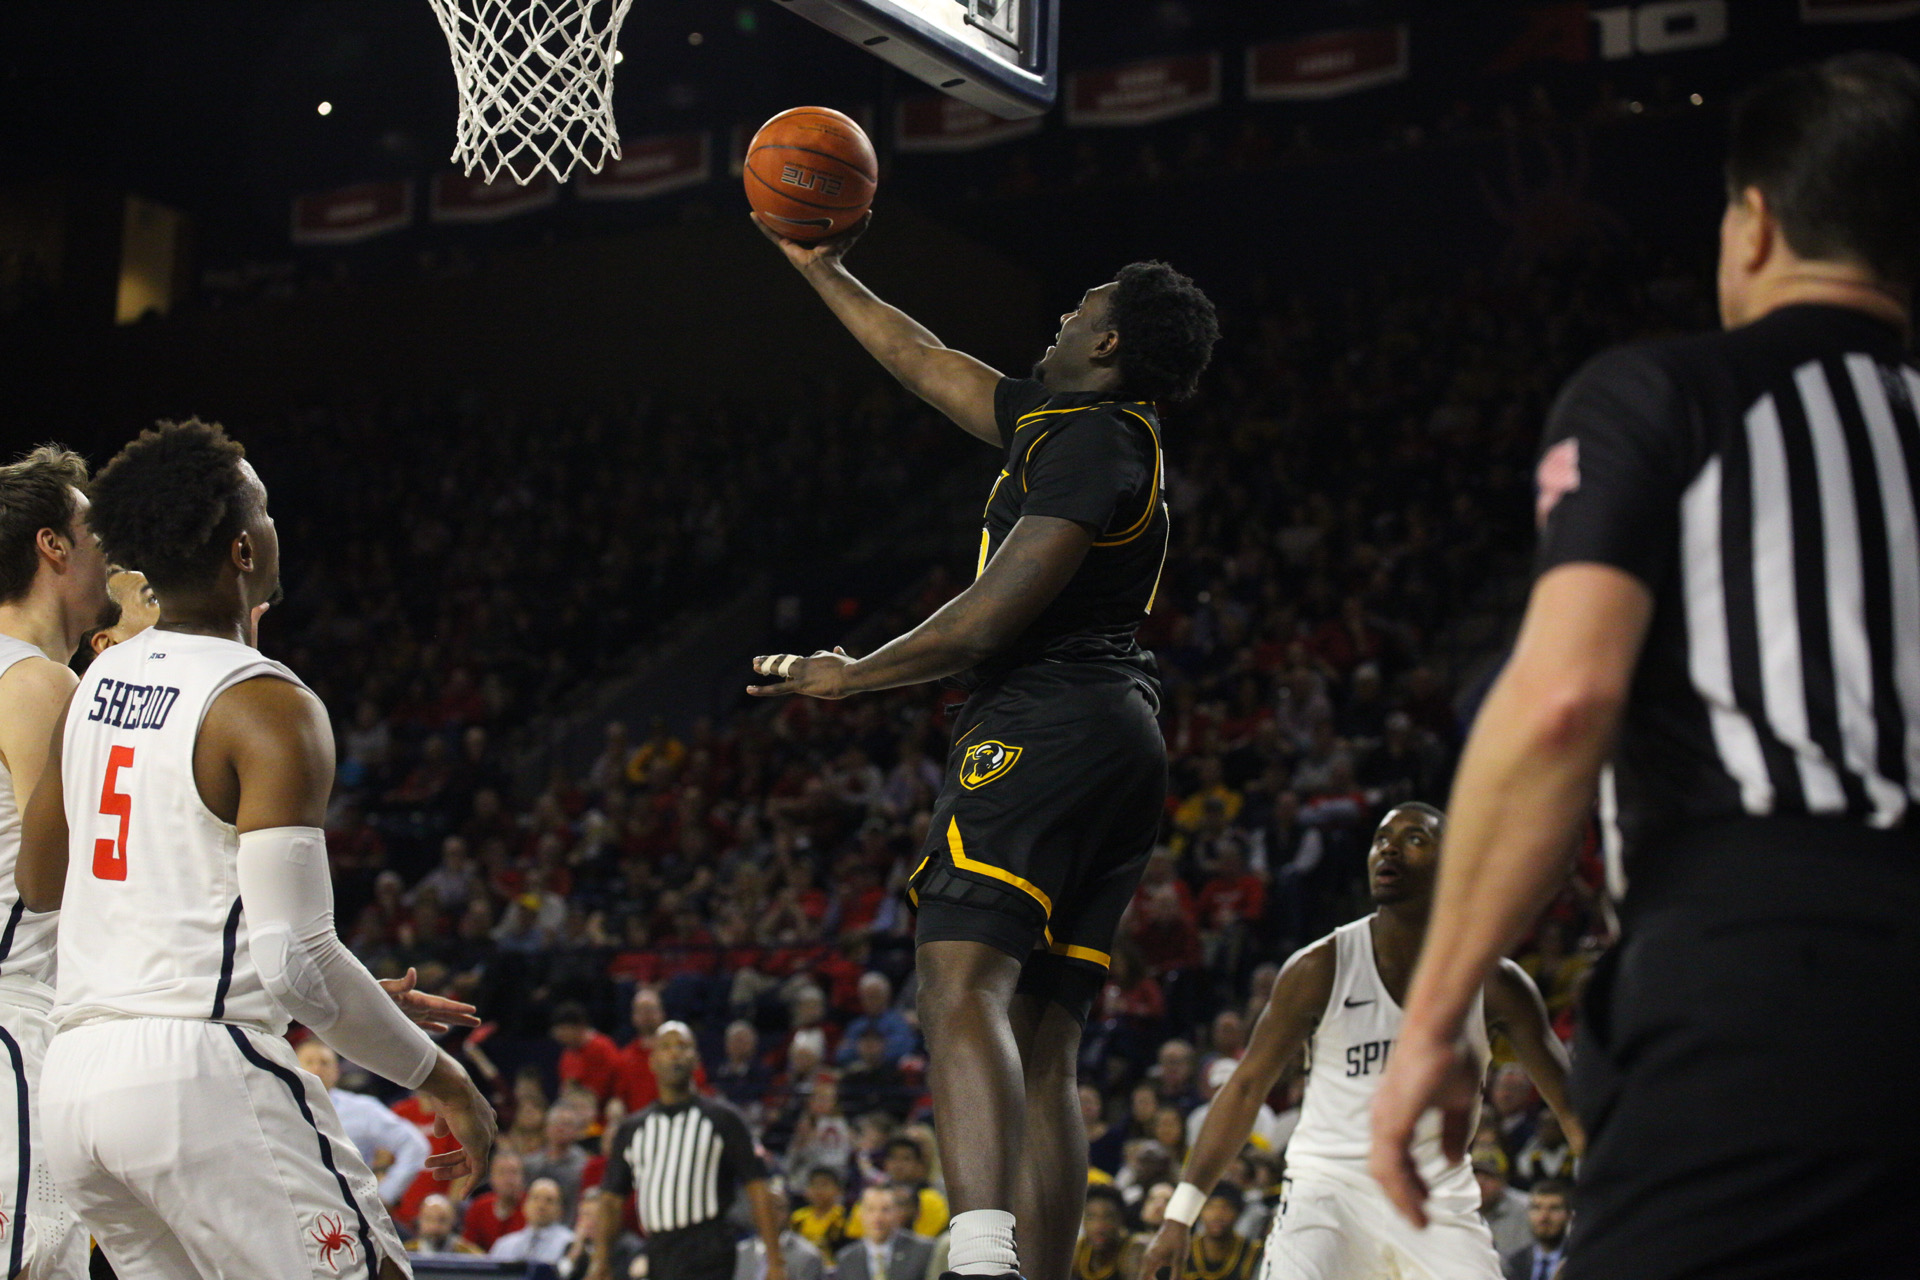 VCU men’s basketball fall to Richmond as 3point shooting woes continue